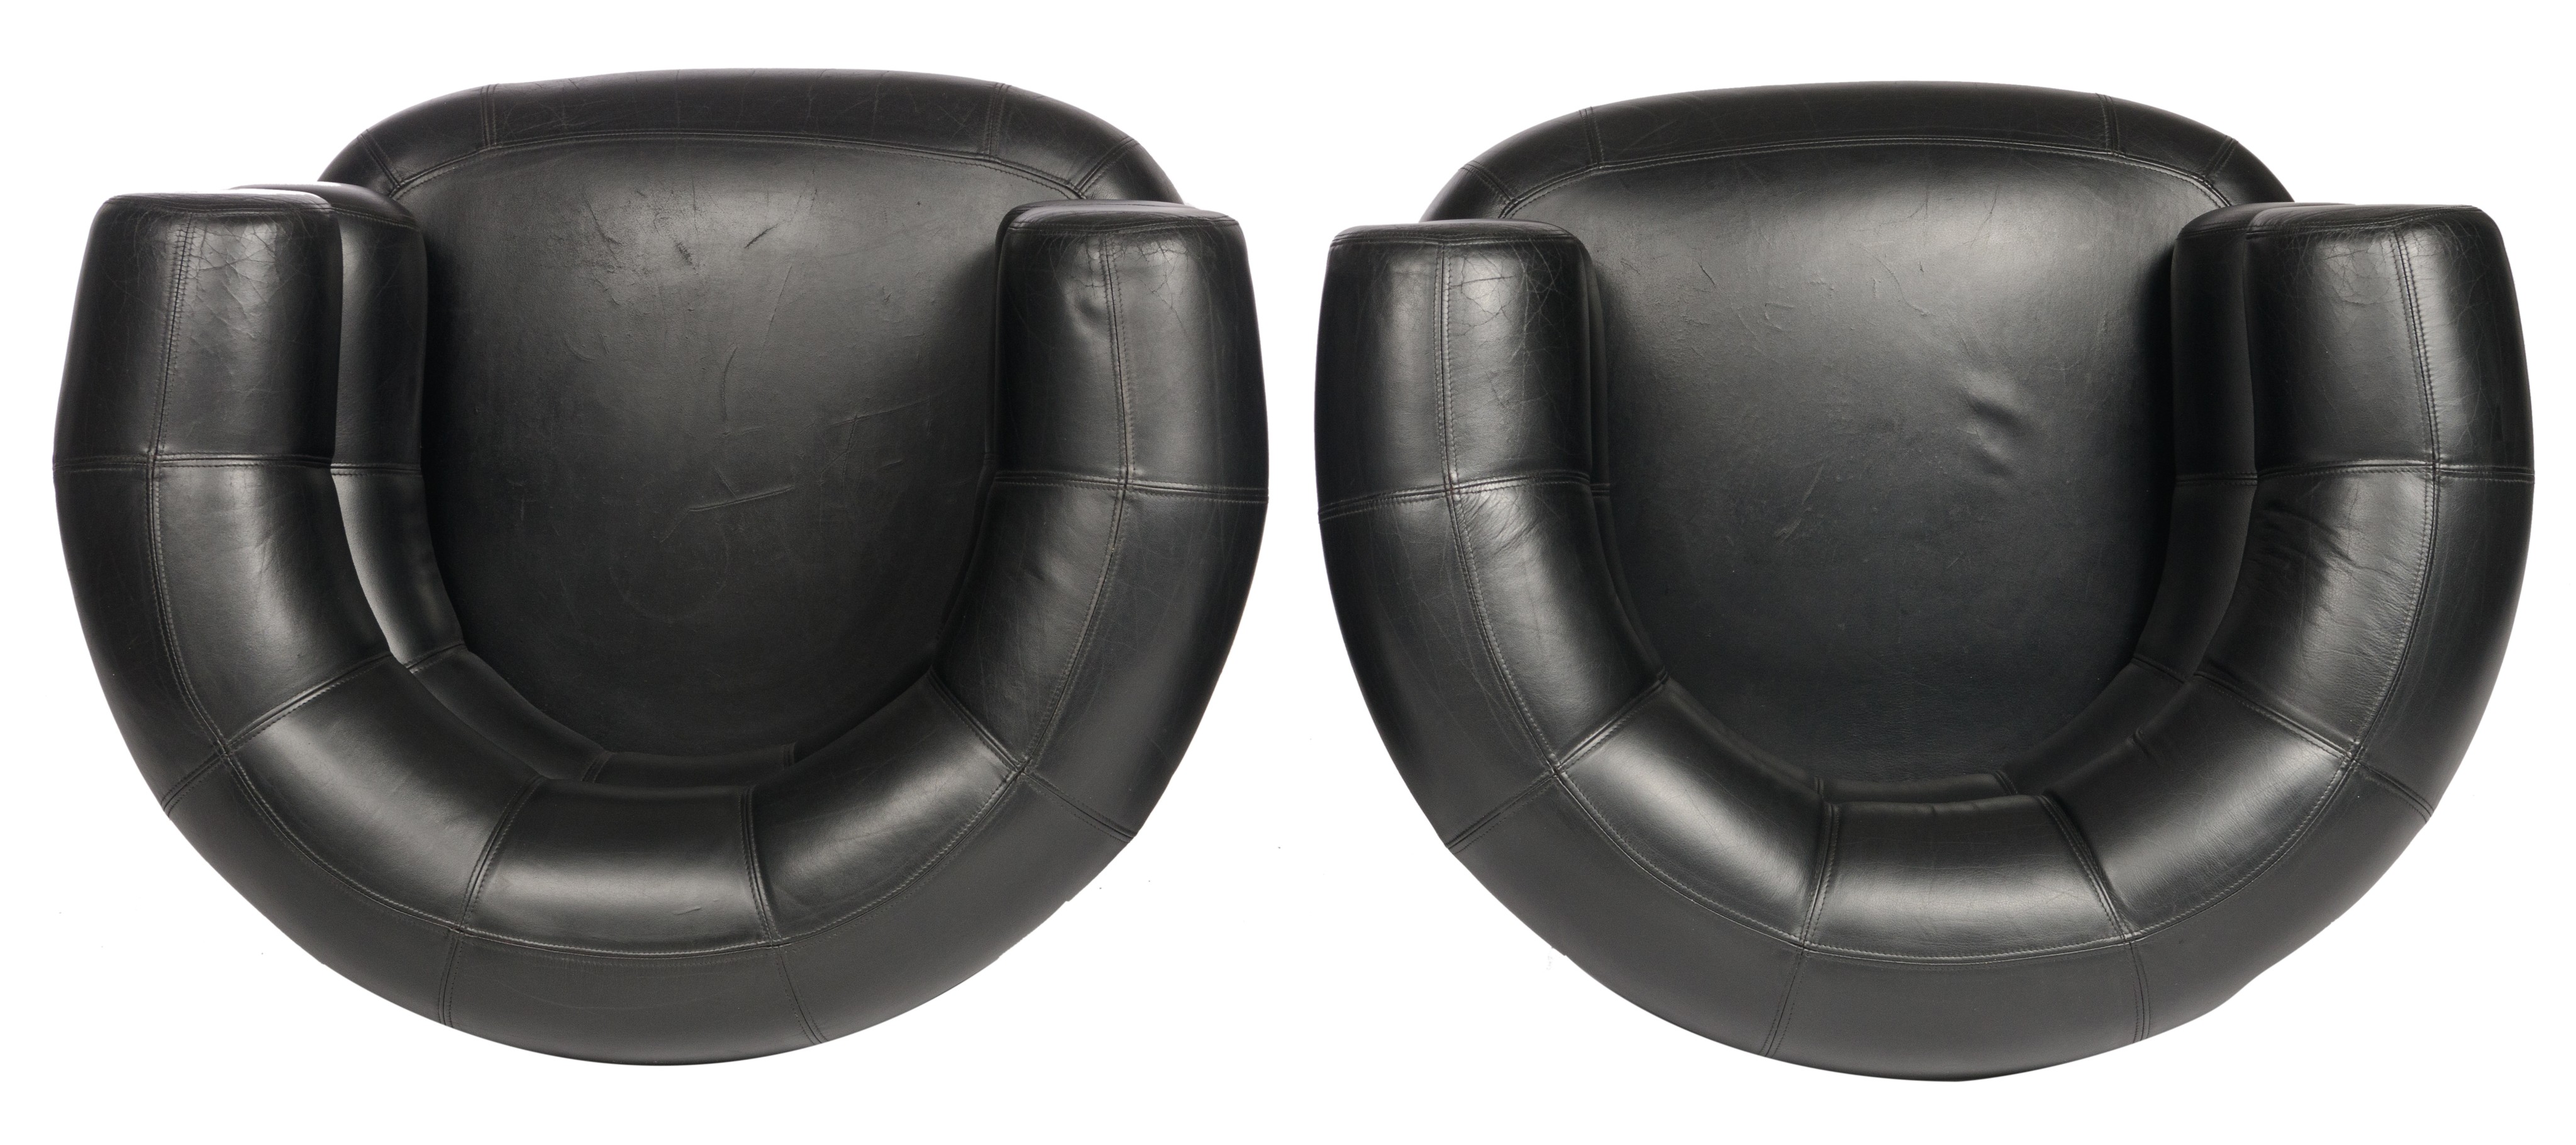 A pair of vintage 'Bibendum chair', designed by Eileen Grey in 1921, H 70 - W 92 cm - Image 7 of 9